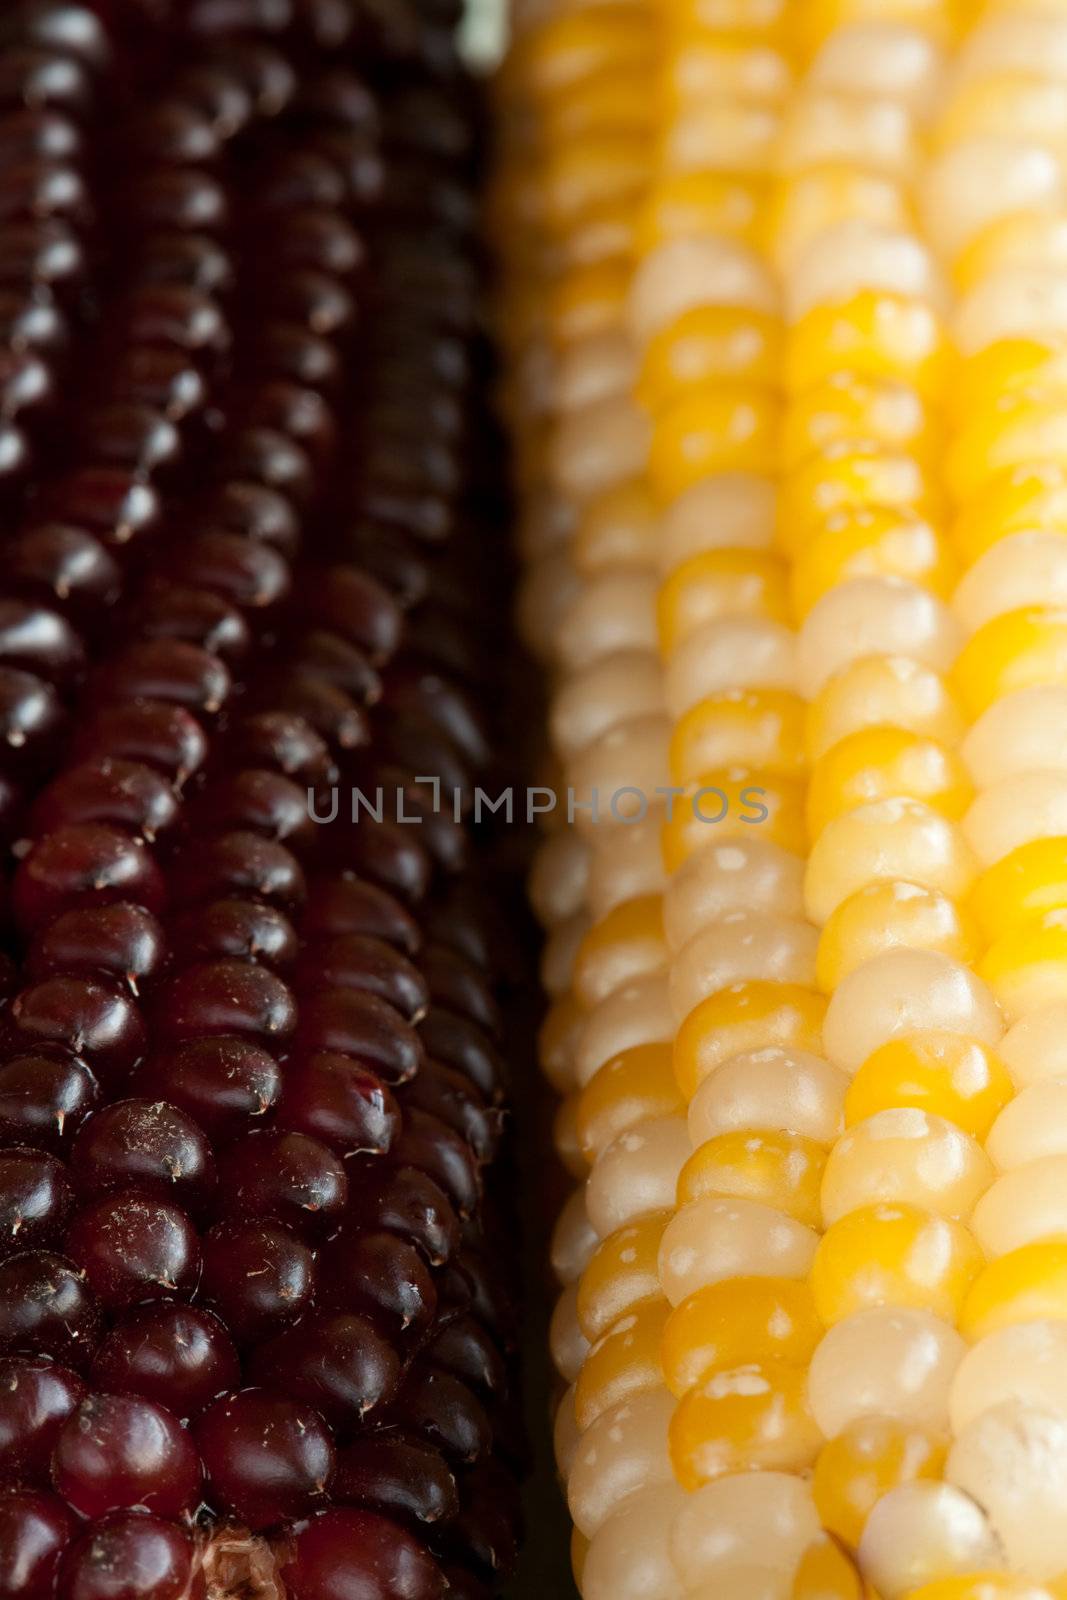 Three corn ears on a table, close-up